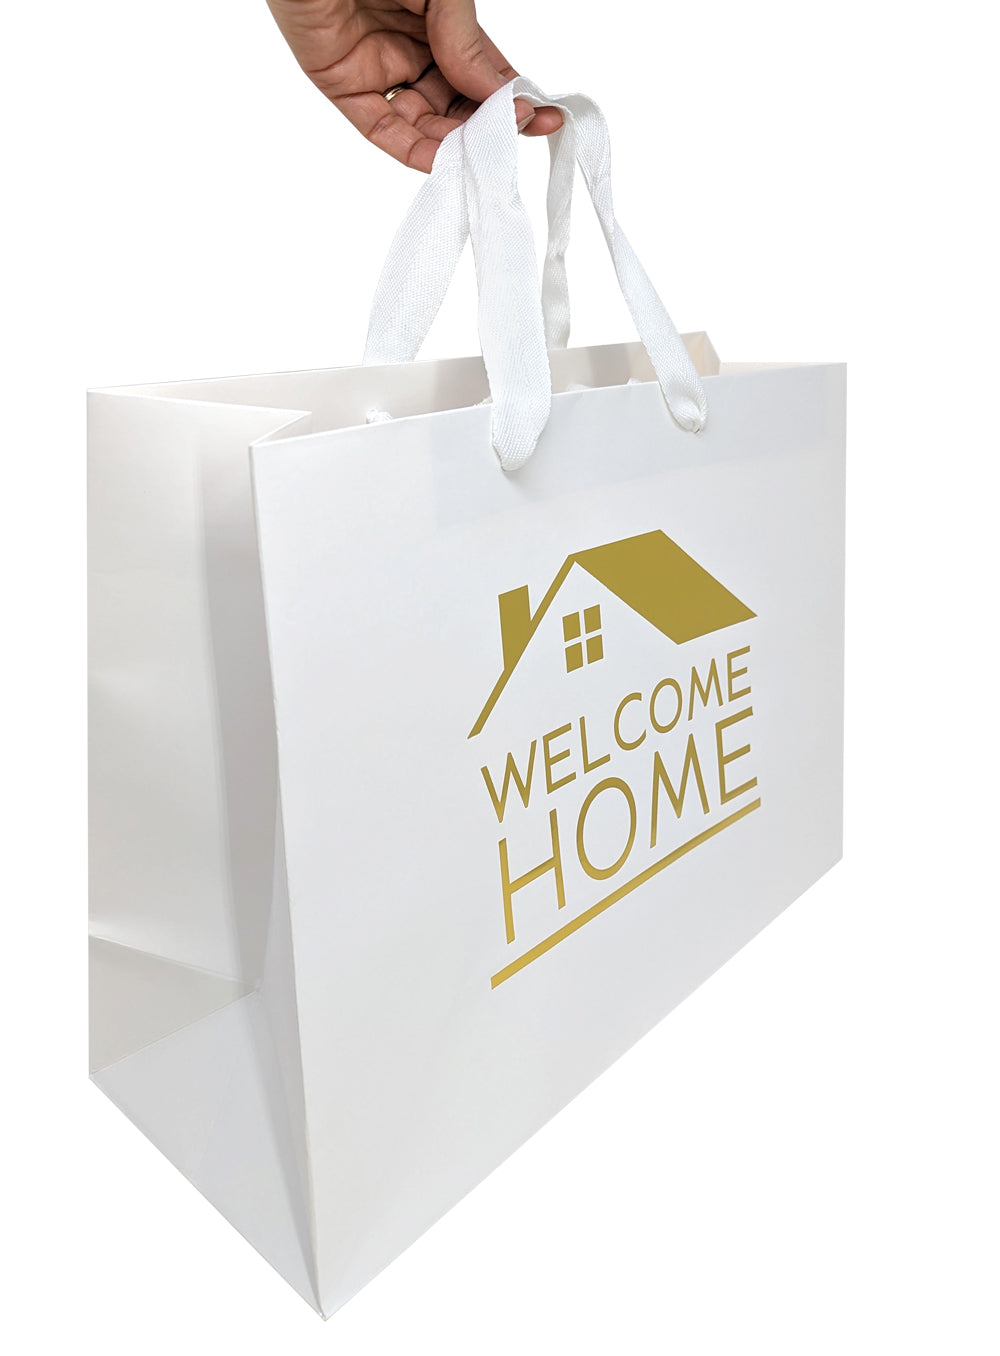 Welcome Home Bags - House-Shaped Gift Bags for New Home Gifts - House  Warming Gifts New Home, Real Estate Agent Supplies, Closing Gifts for Home